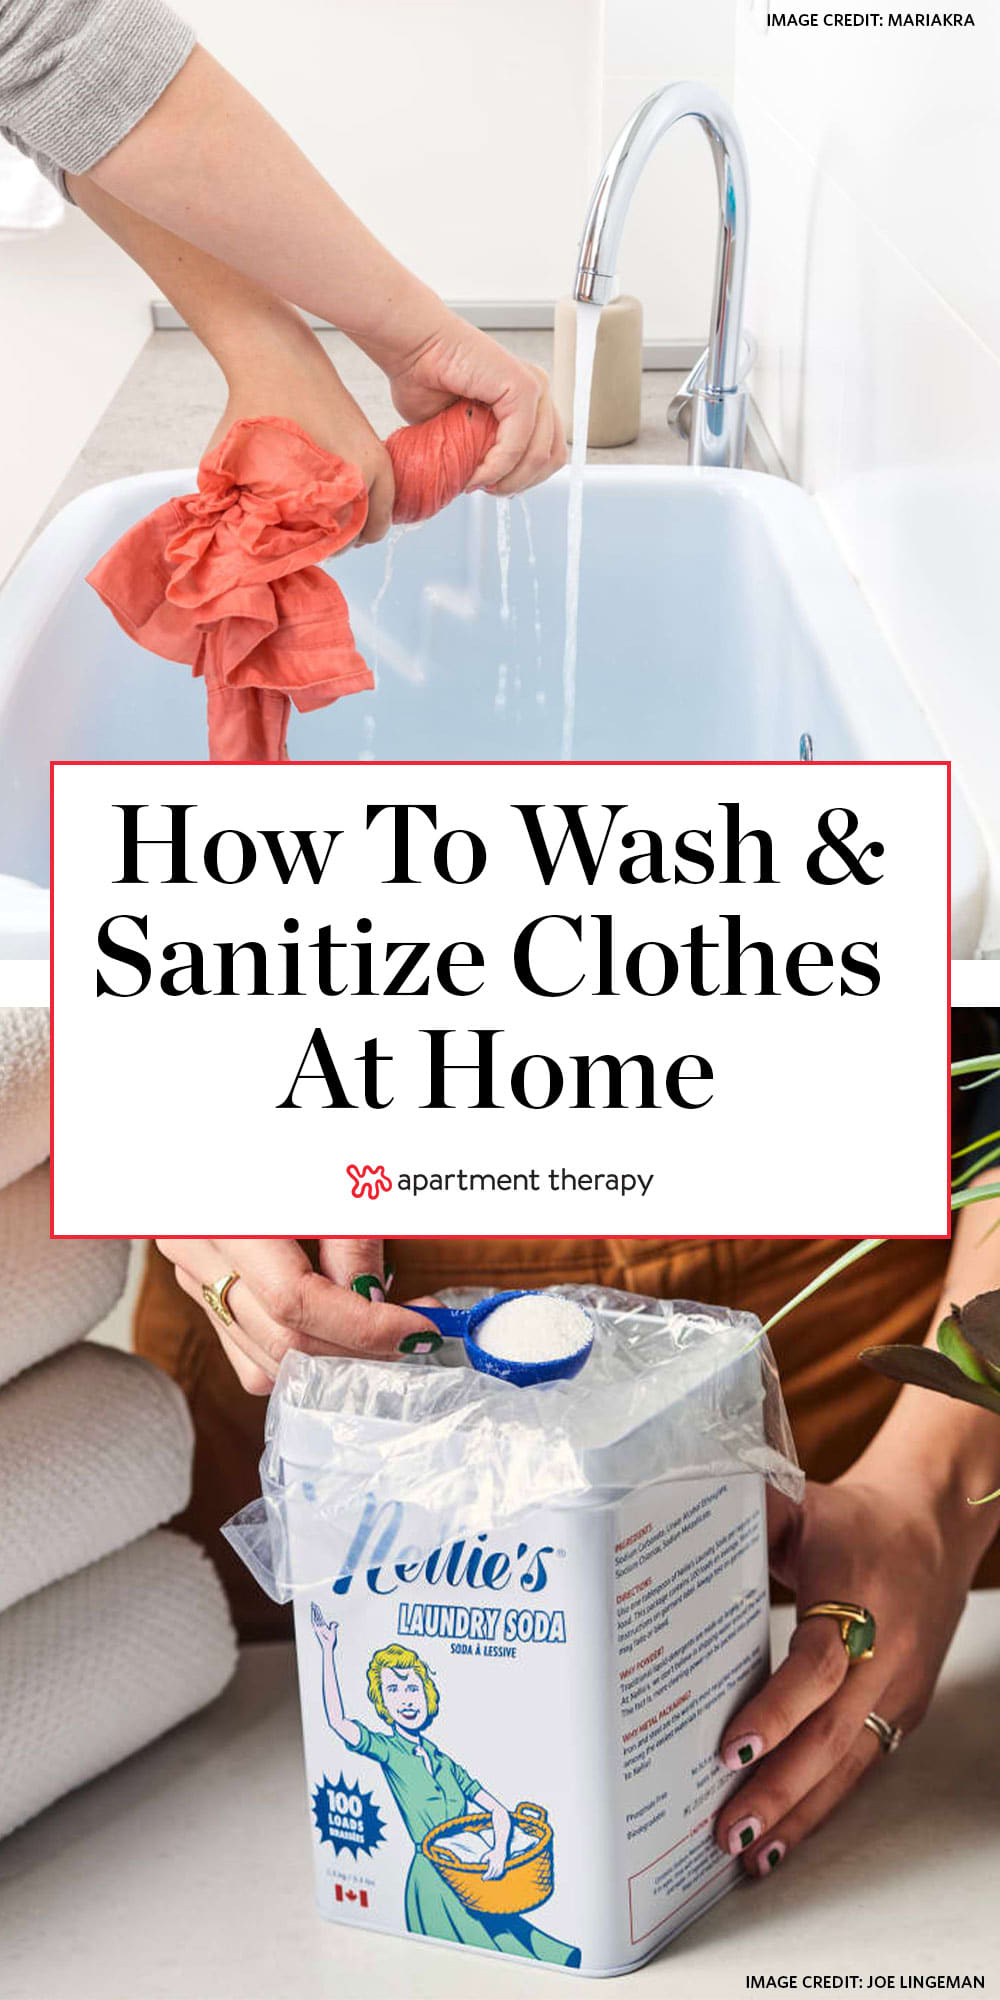 Need to wash your clothes by hand? Here's how to do it right - CNET